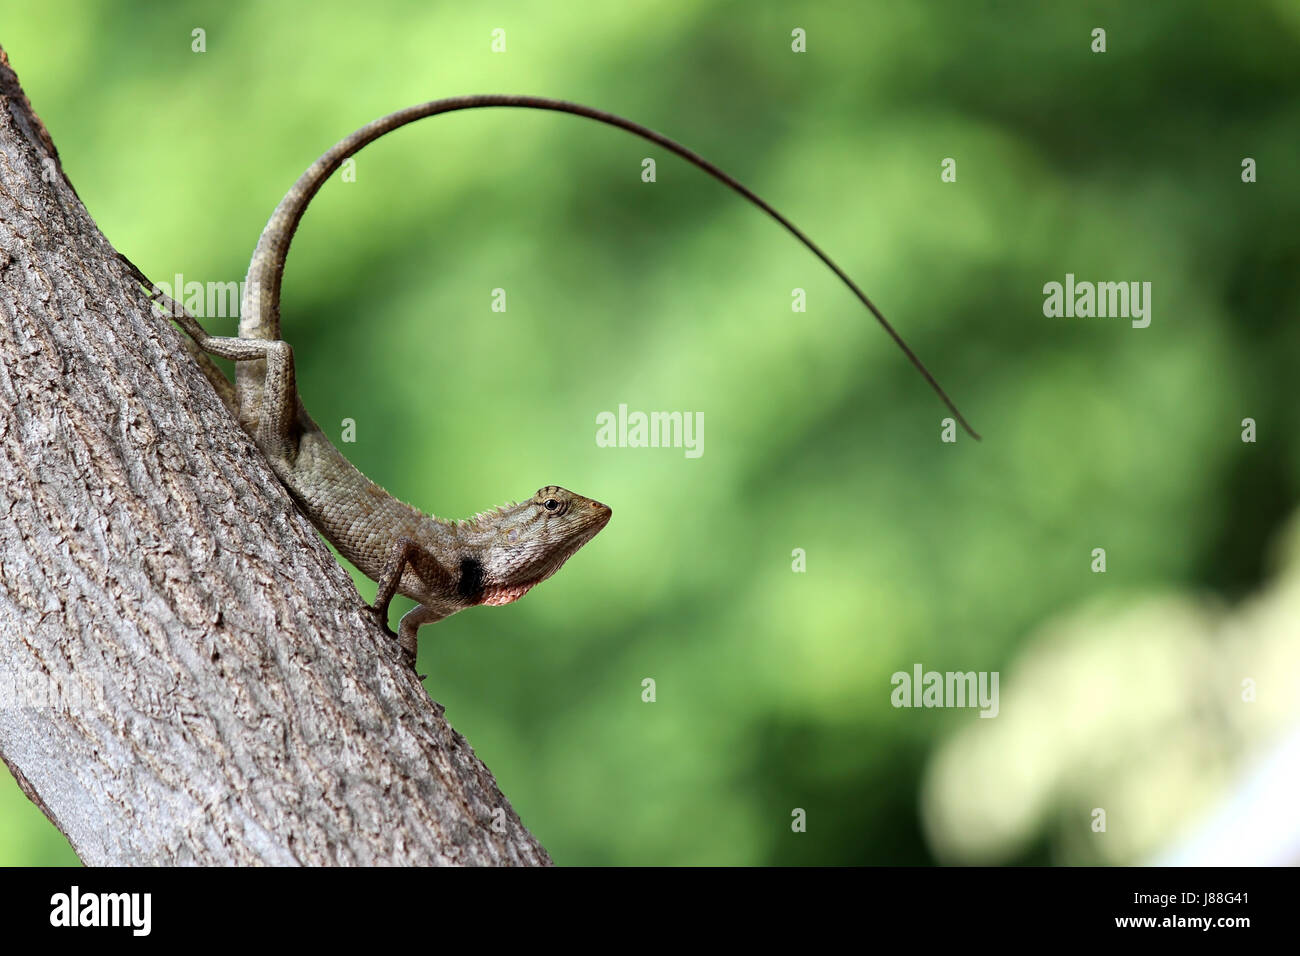 lizard chameleon on tree with nature background Stock Photo